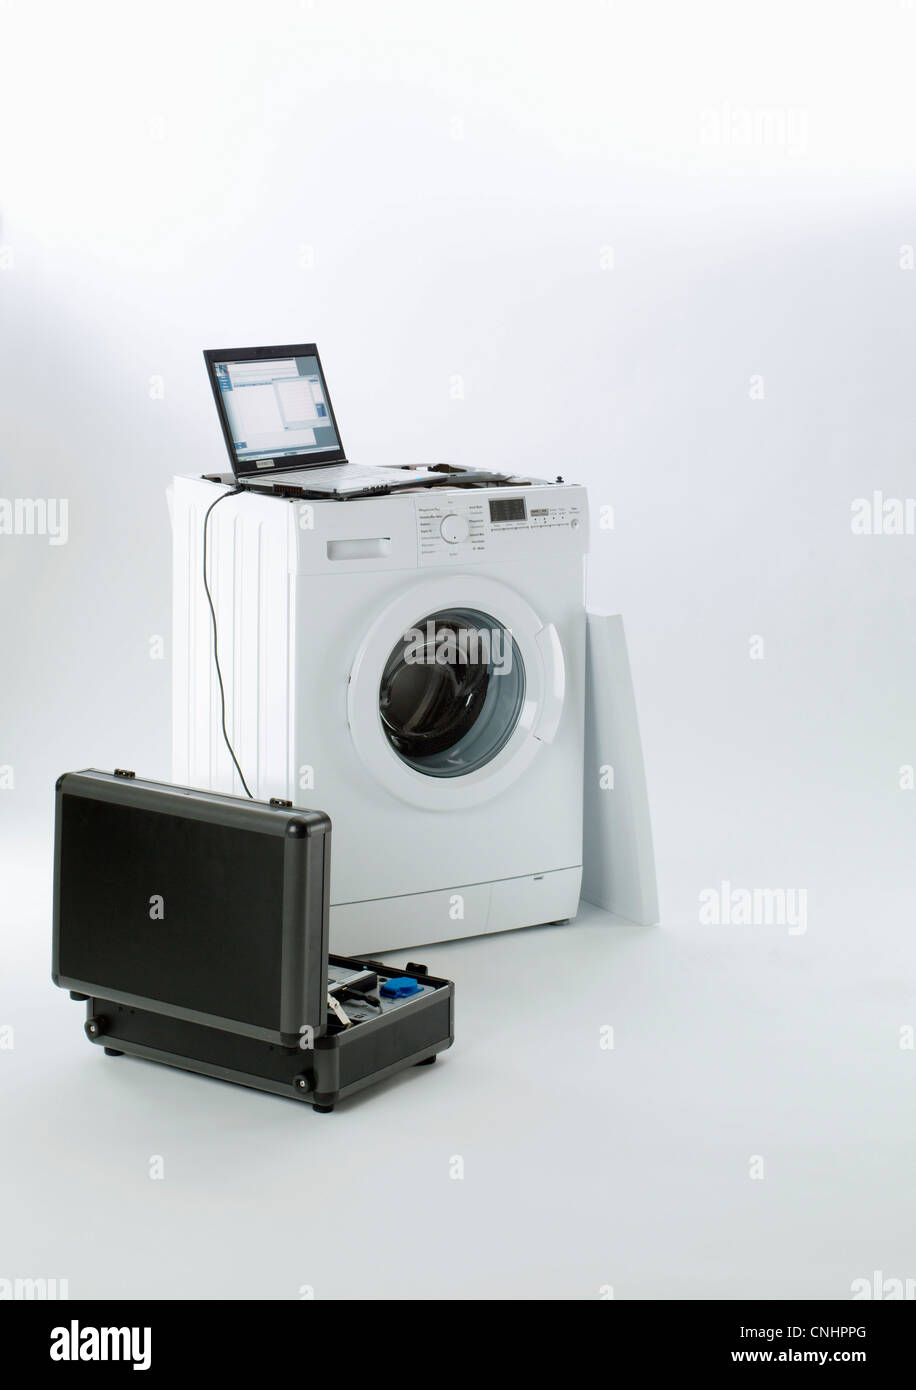 A washing machine being serviced Stock Photo